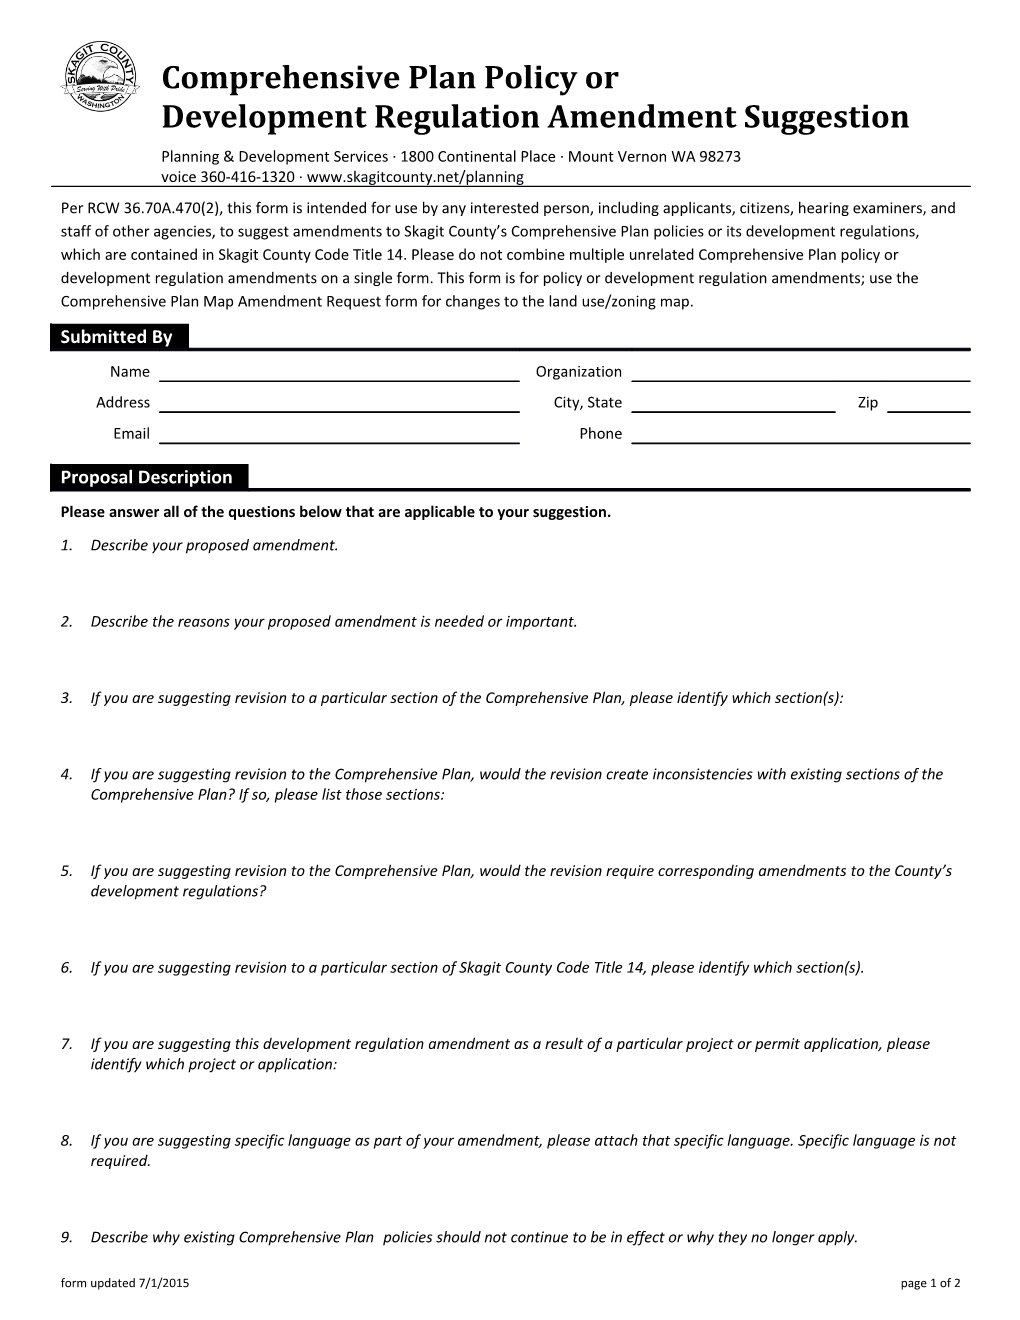 Per RCW 36.70A.470(2), This Form Is Intended for Use by Any Interested Person, Including